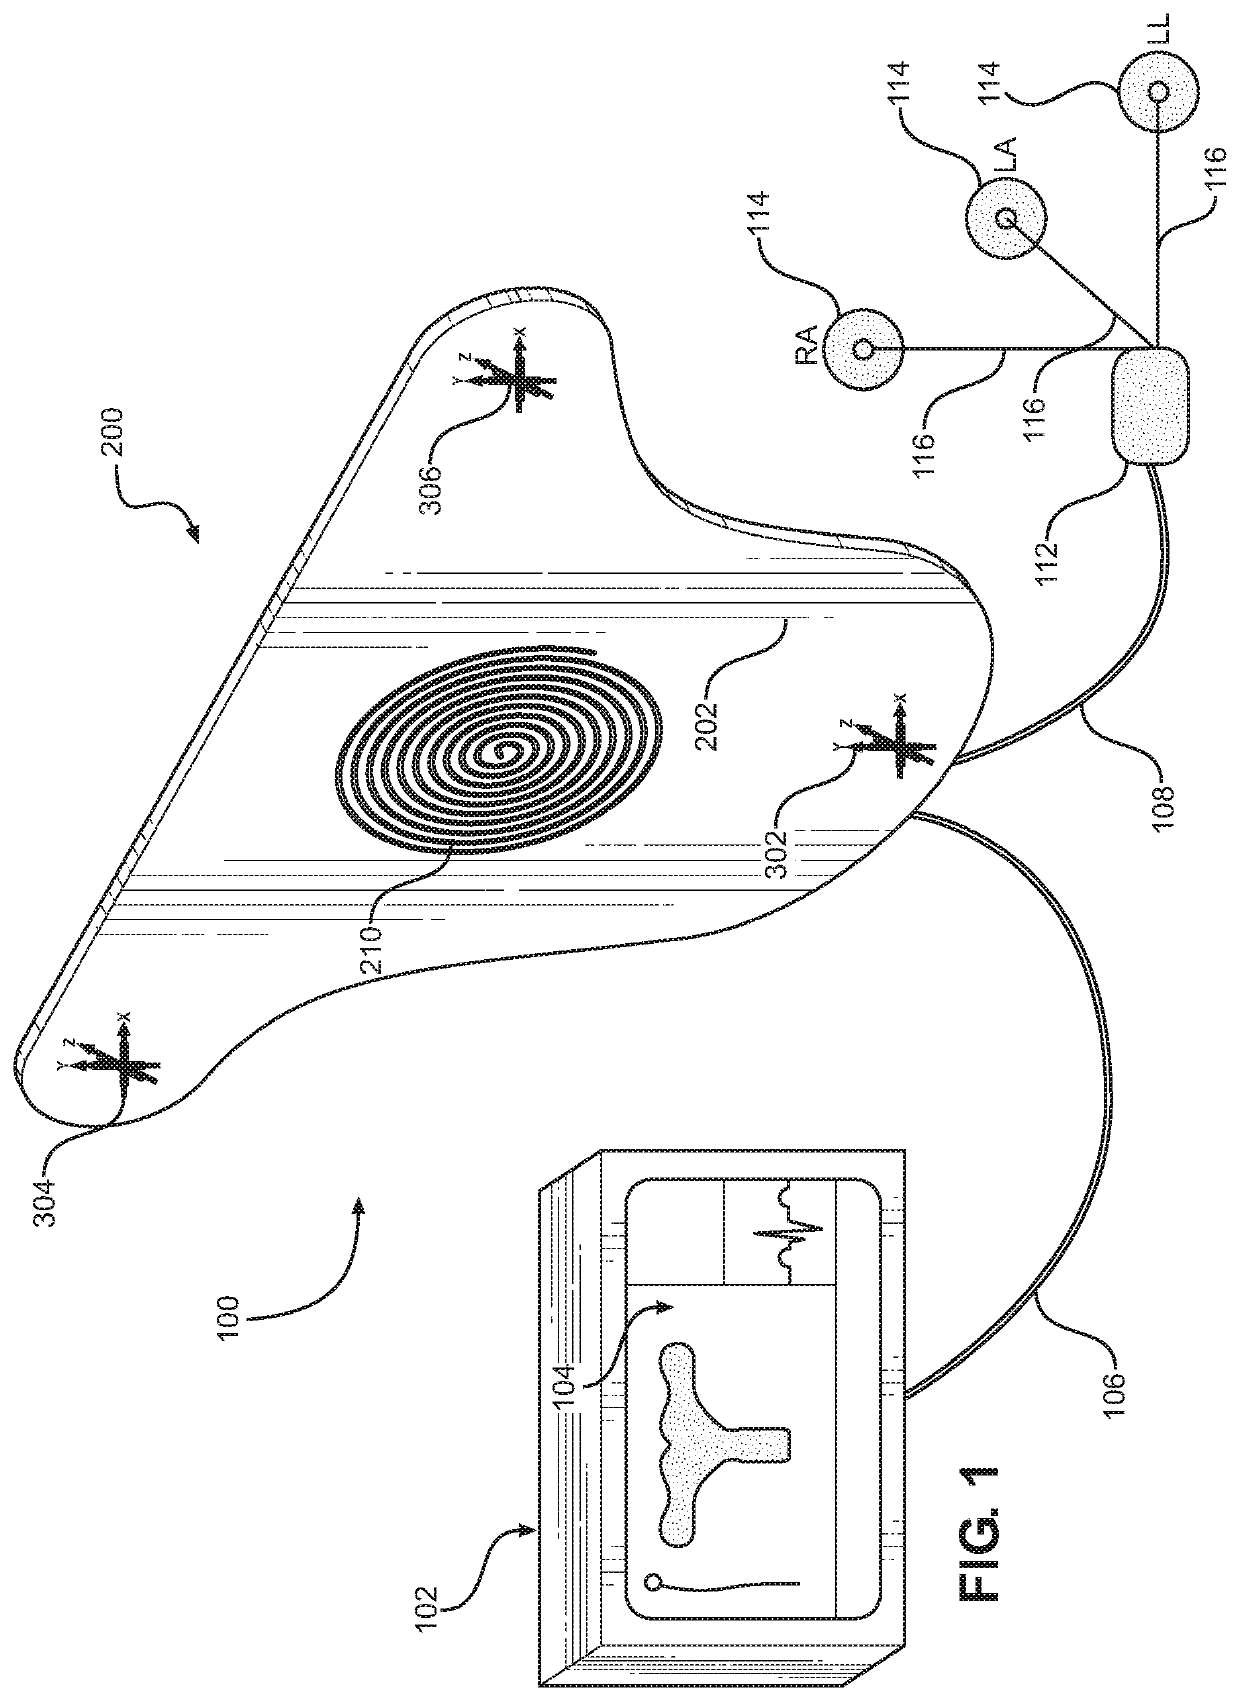 Wireless medical device navigation systems and methods